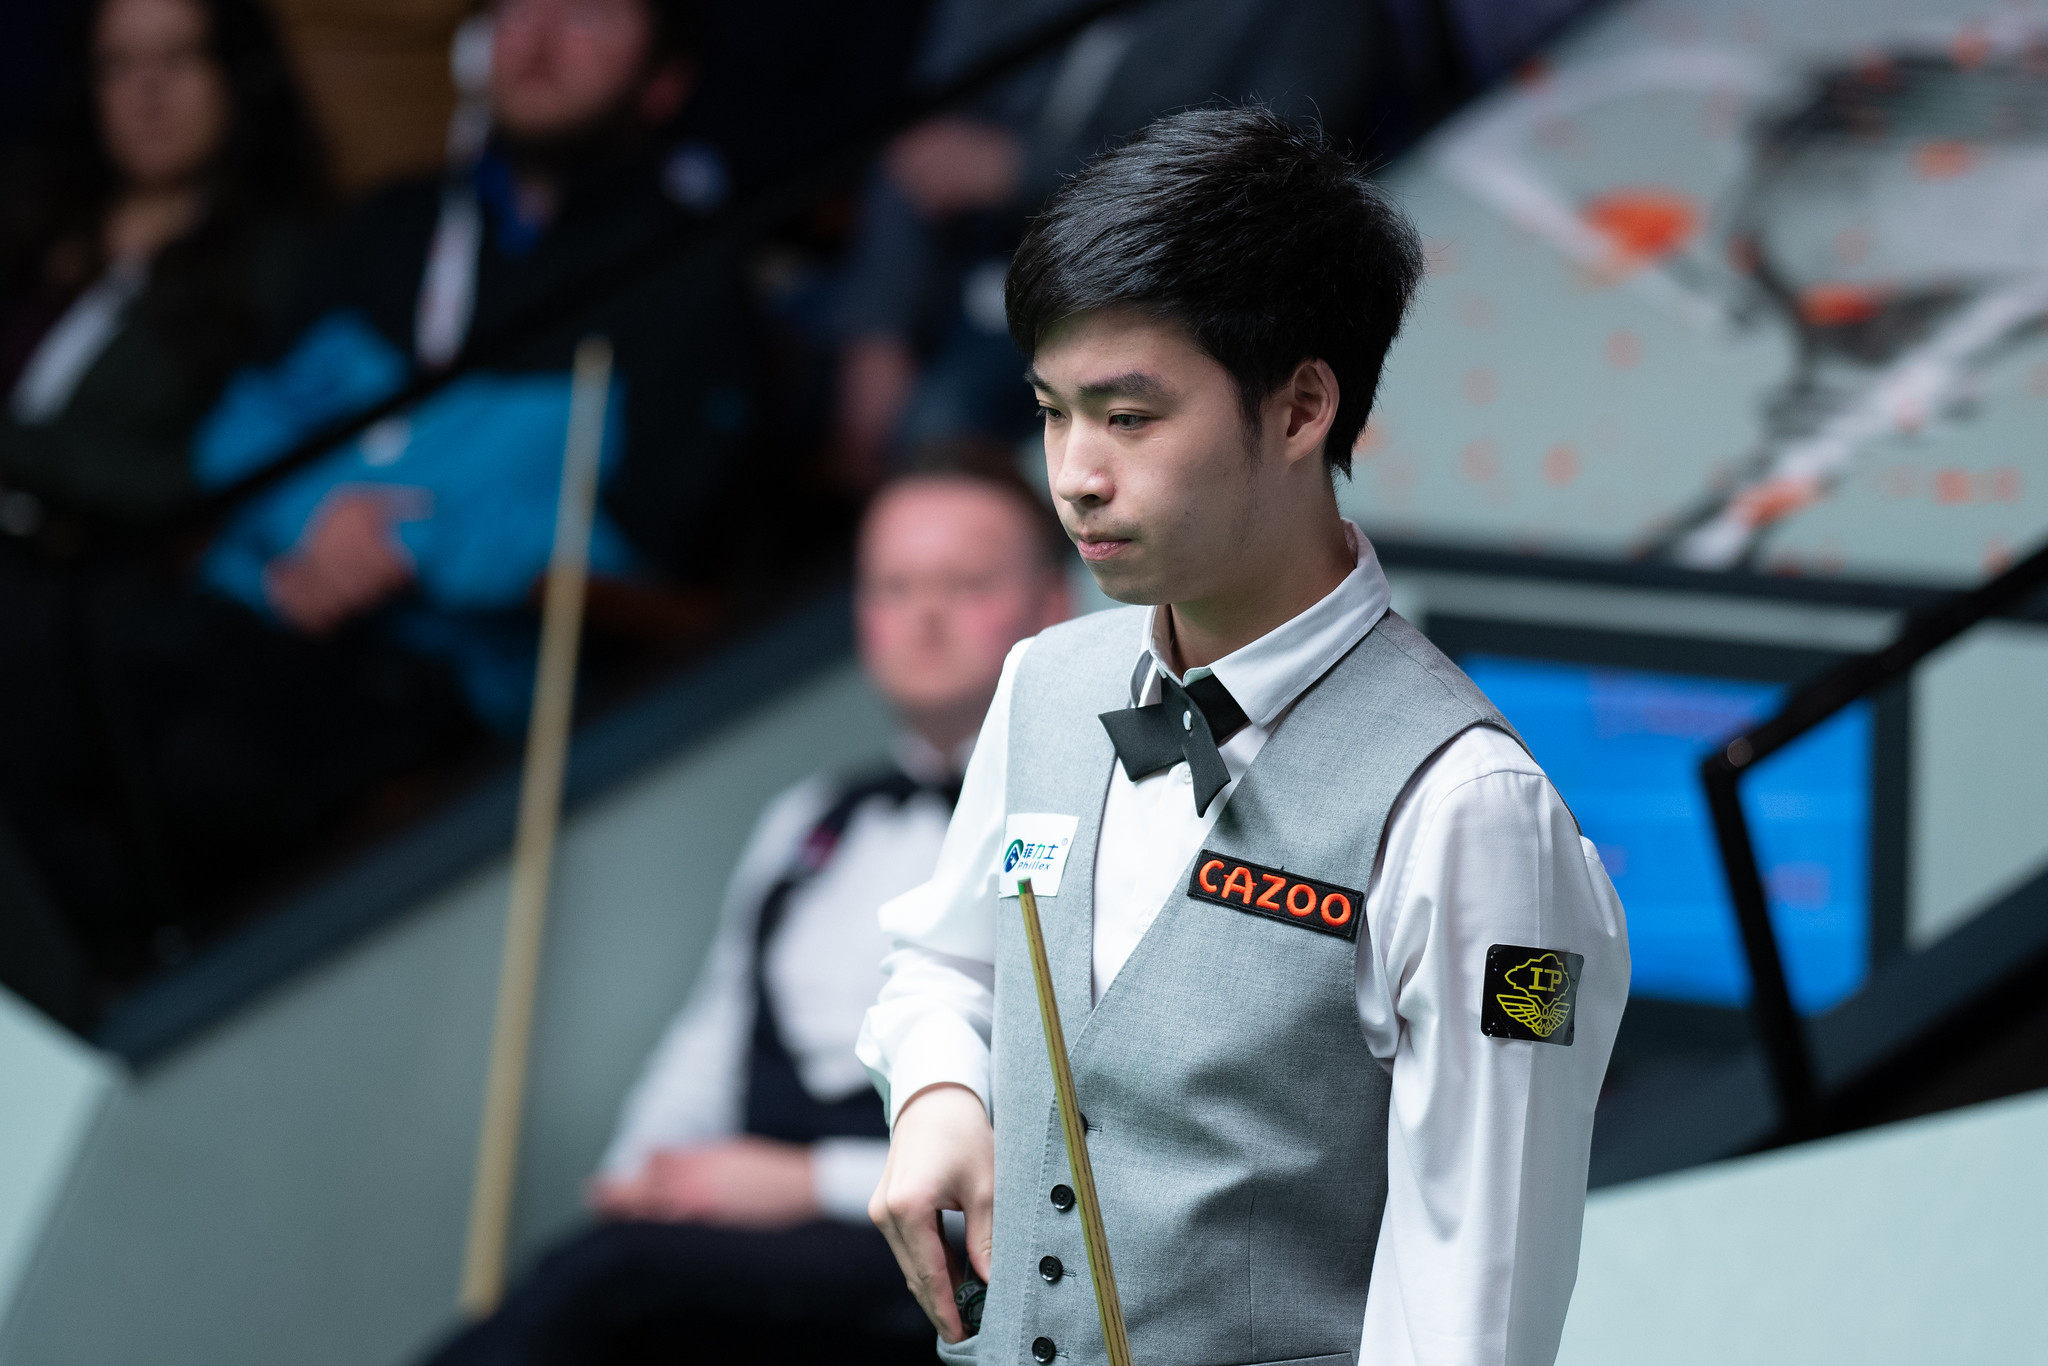 Si Jiahui is up 6-2 after the first session of his second round match against Robert Milkins at the World Championship in Sheffield. Photo: Handout